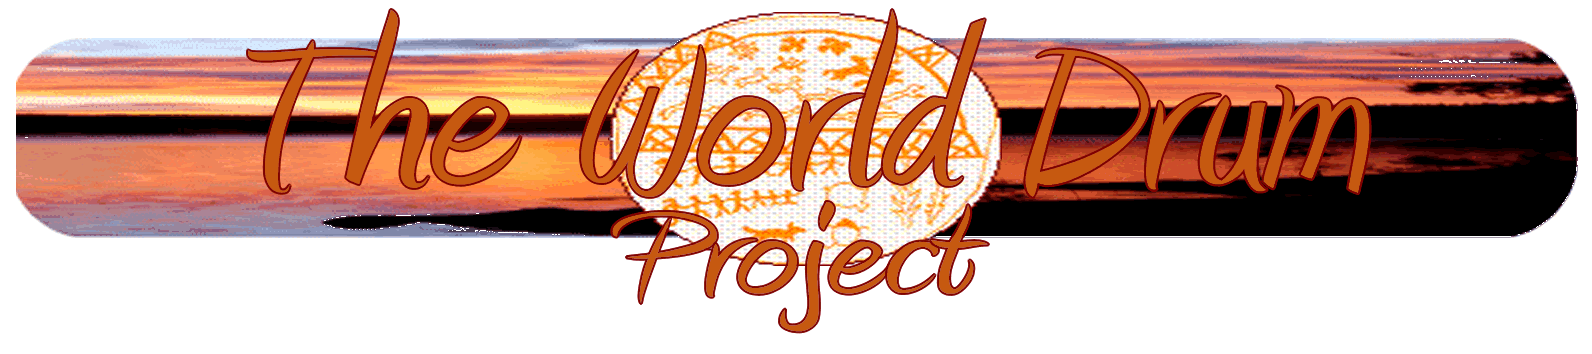 World drum project